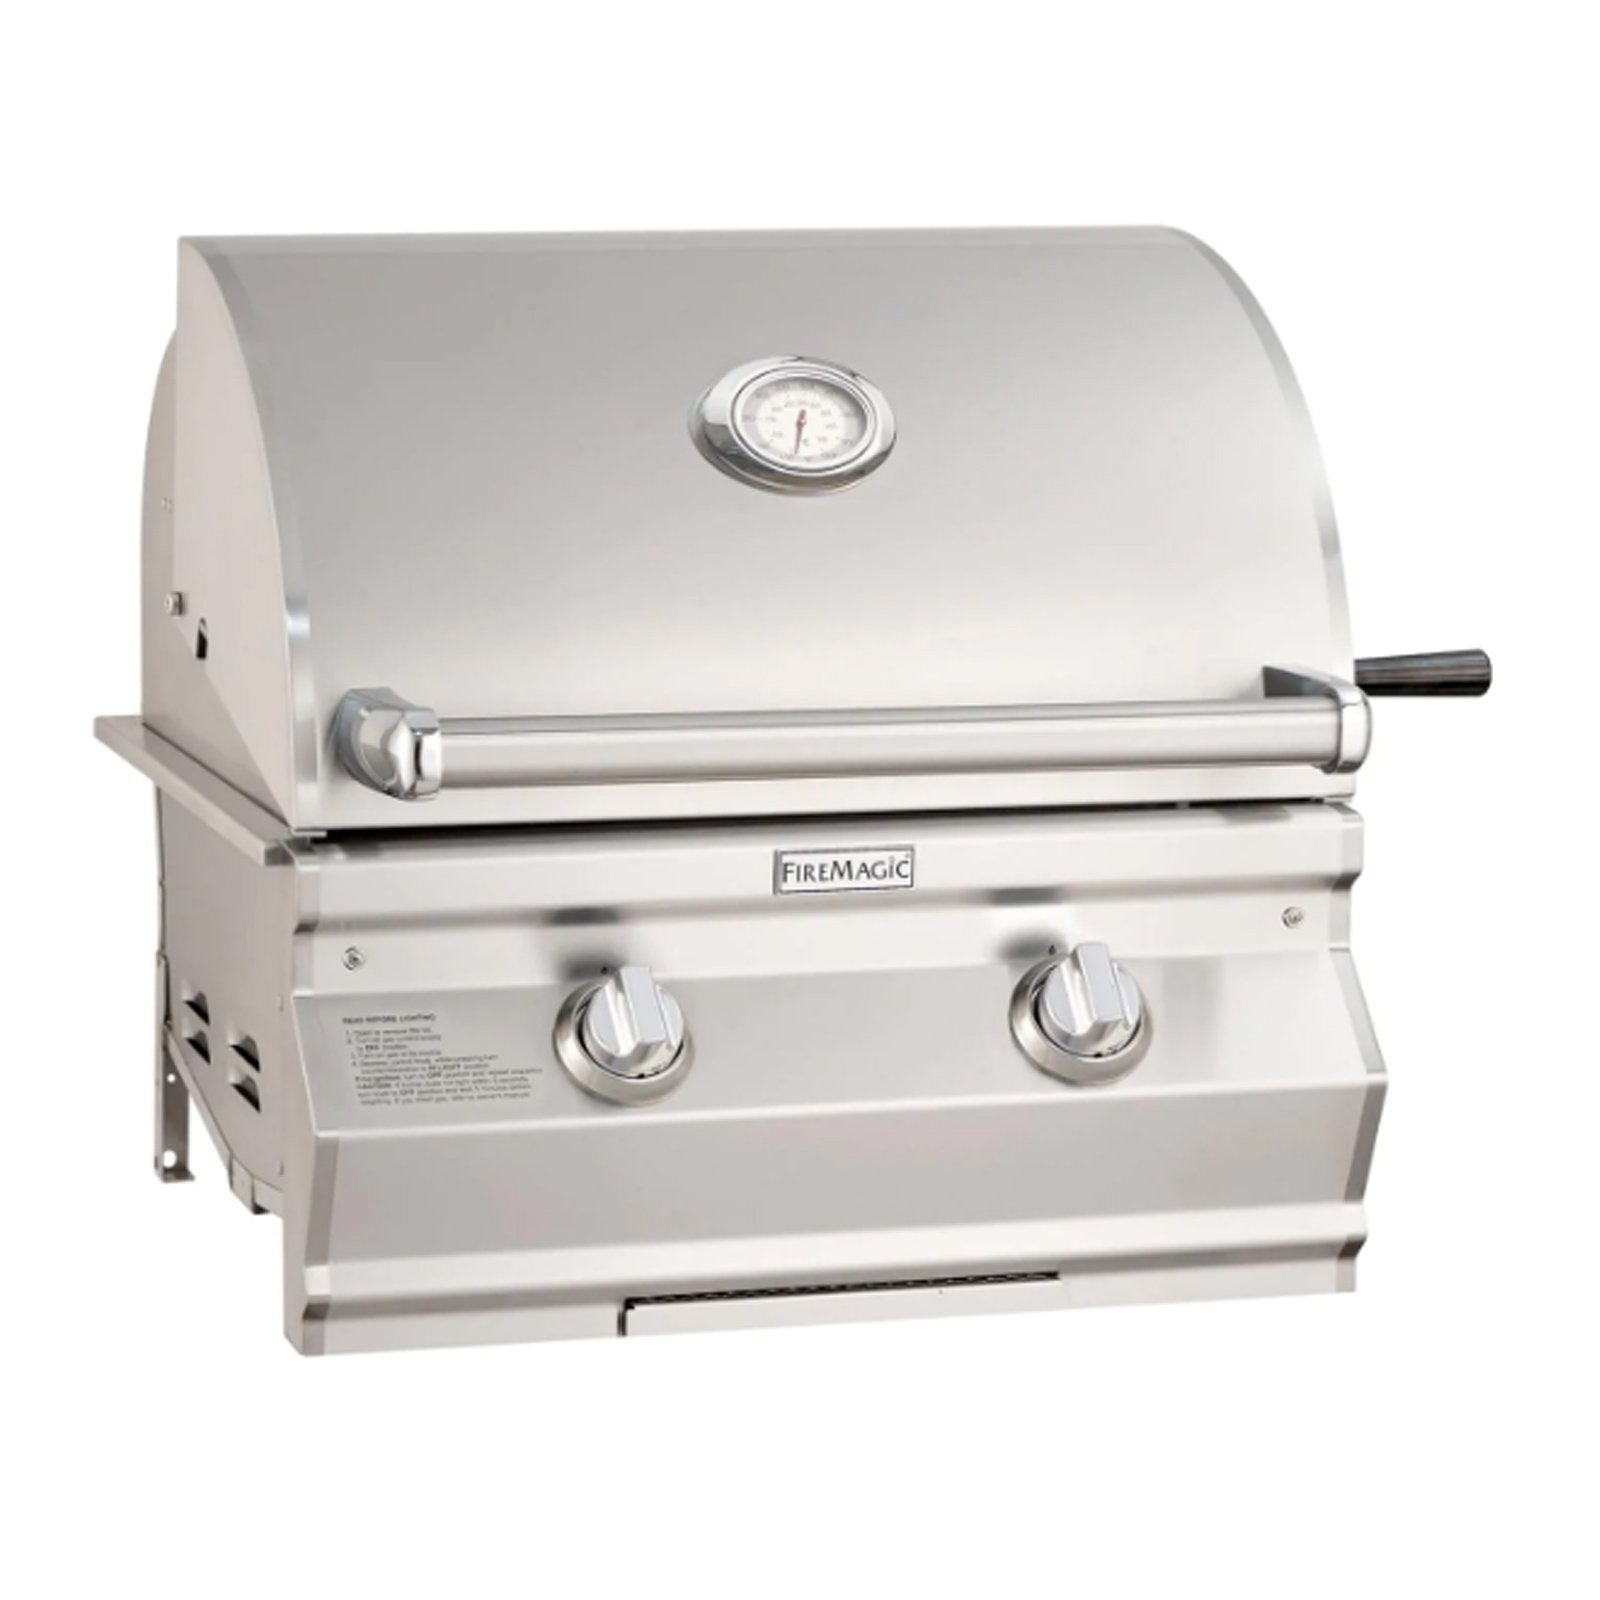 fire-magic-choice-muilt-user-c430i-24-inch-gas-built-in-grill-with-analog-therm-cma430i-rt1 1